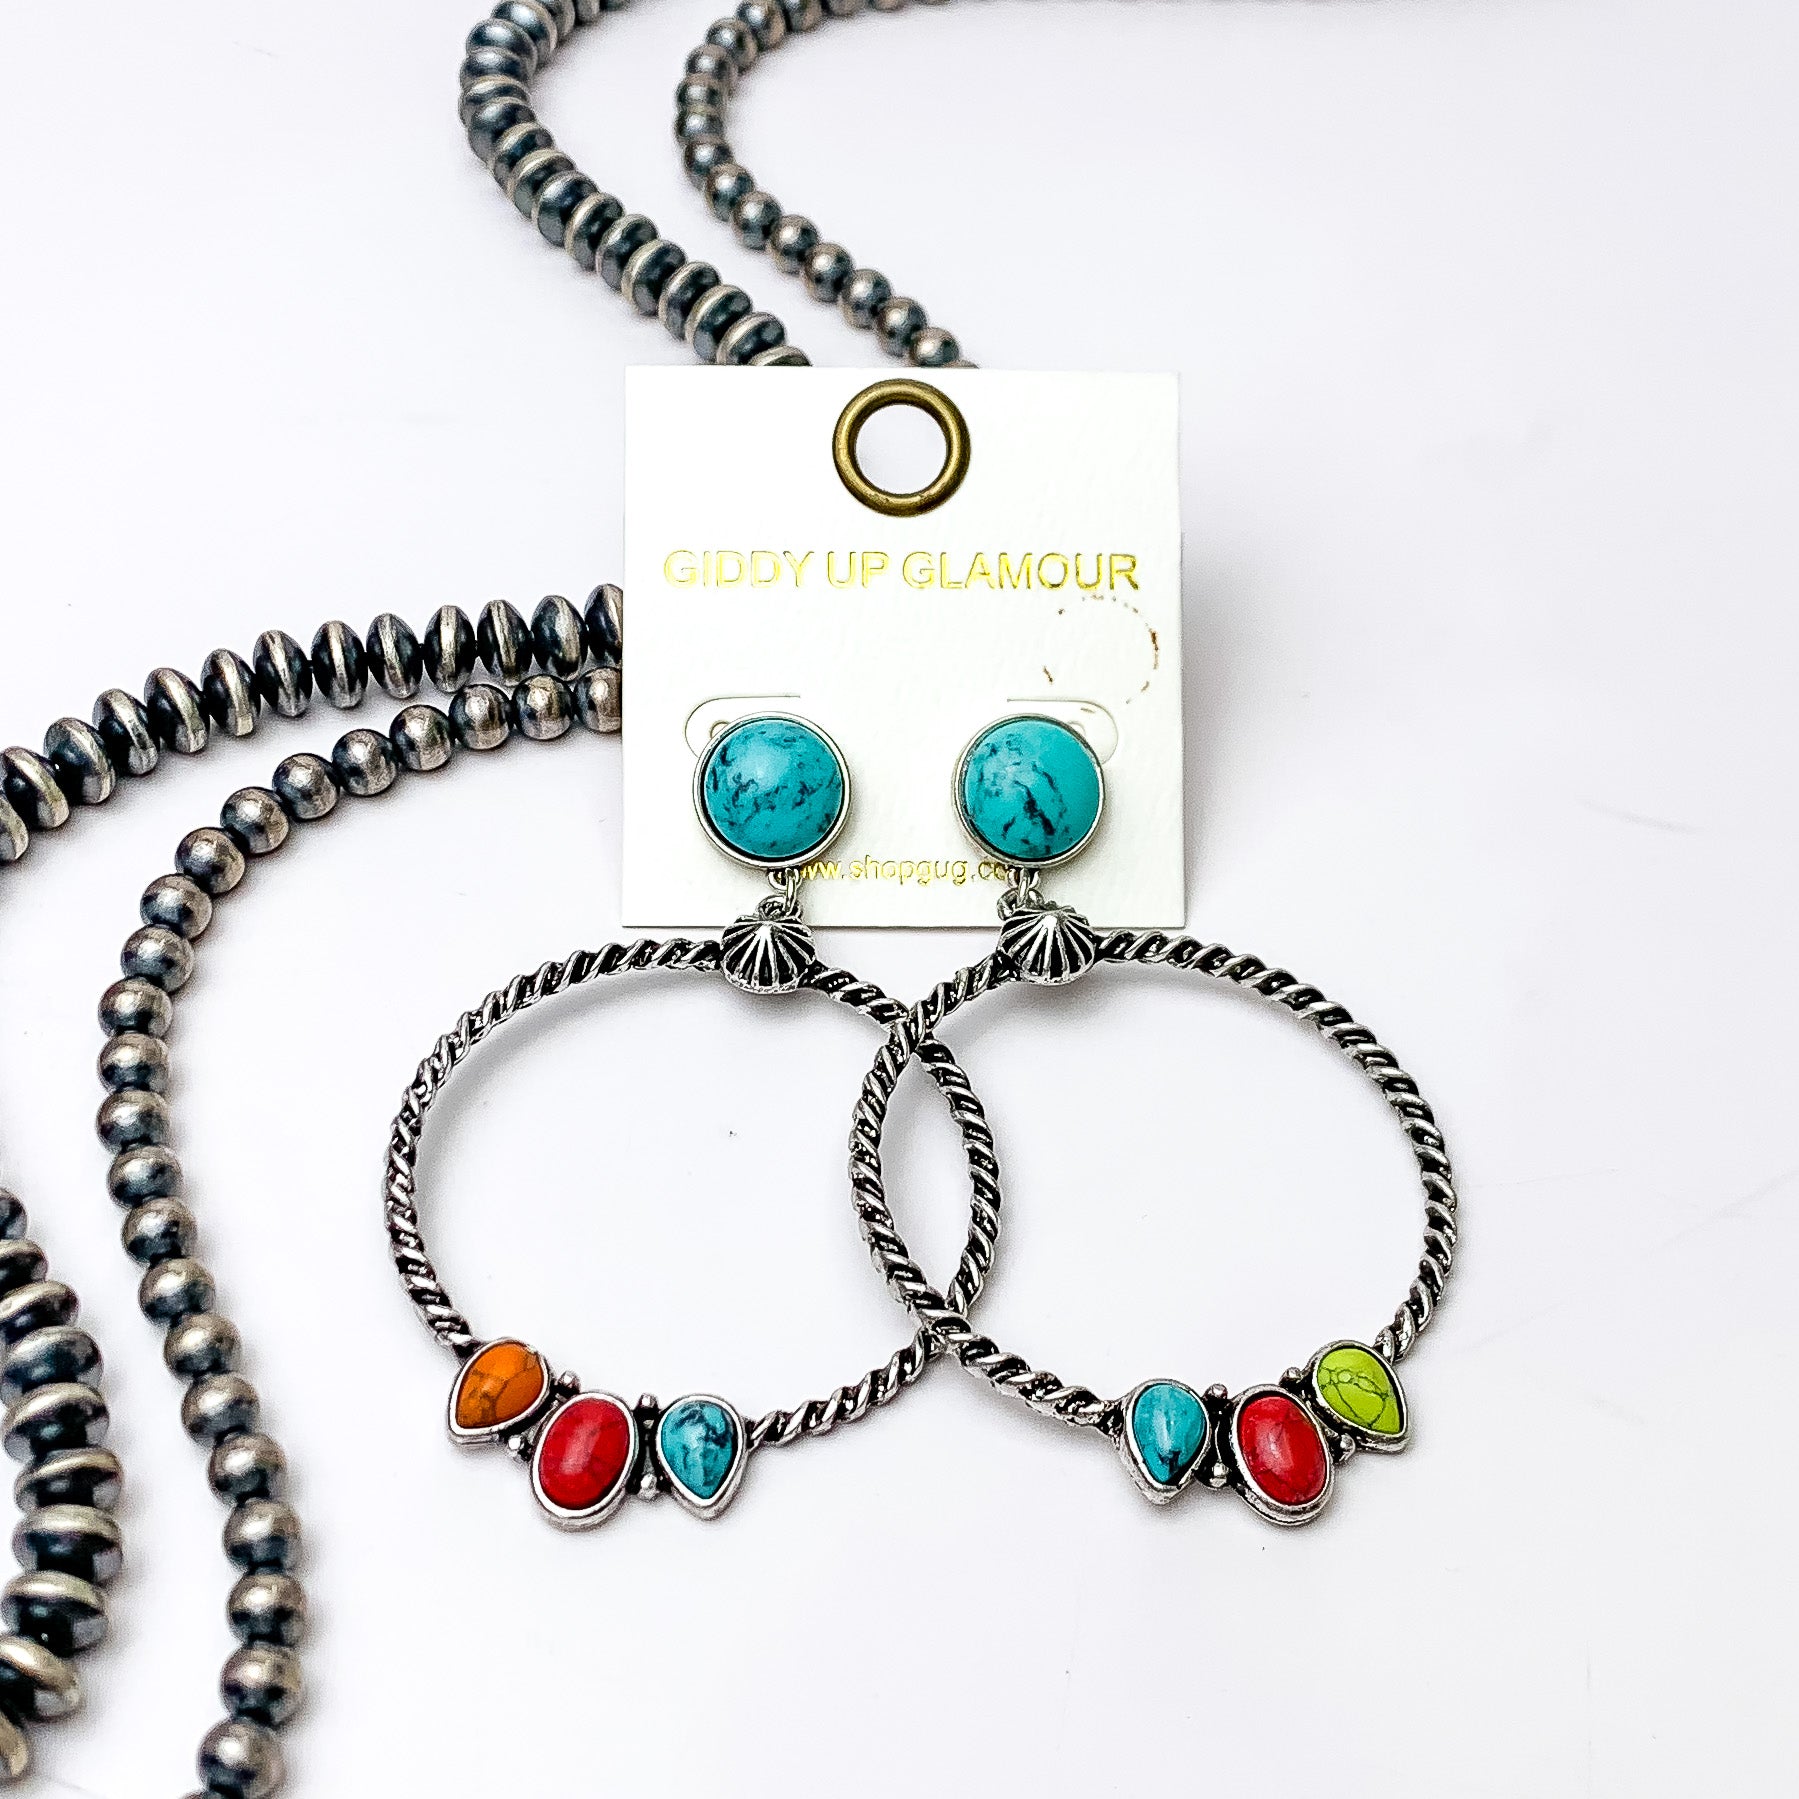 Circle, turquoise stone post earrings with a copper circle drop pendant. At the bottom of the circle there are three different shaped stones in multicolor. These earrings are pictured on a white background with silver beads on the left side bottom of the picture. 